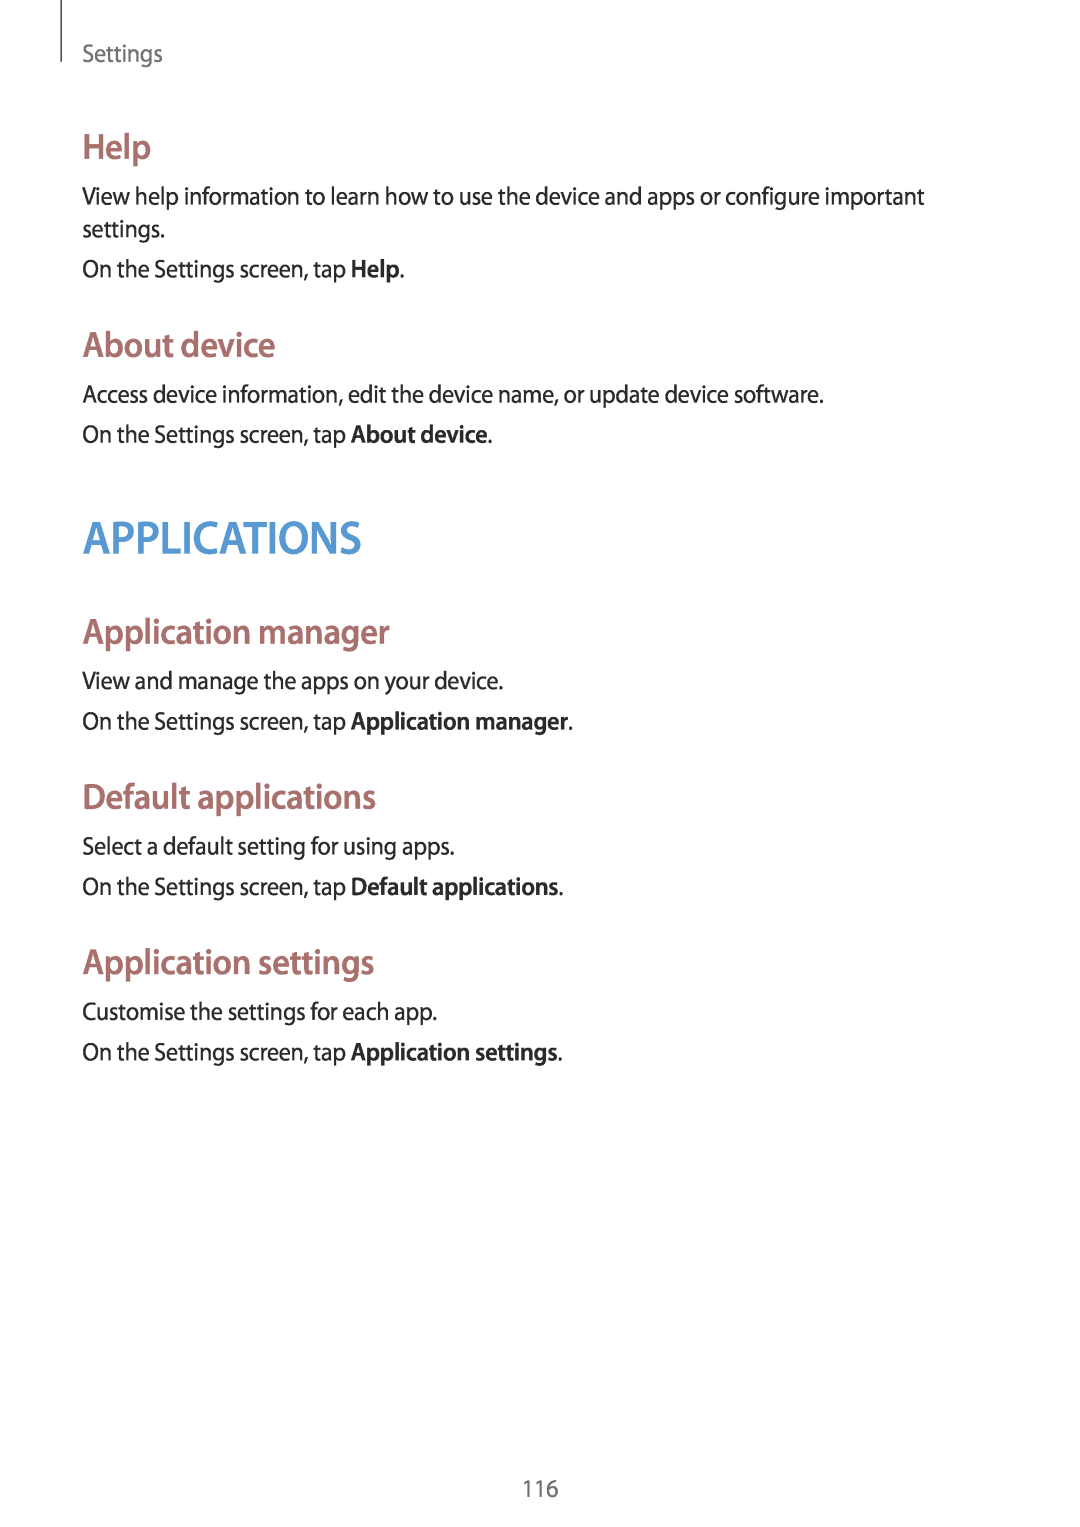 Samsung SM-A300FZWDETL Applications, Help, About device, Application manager, Default applications, Application settings 